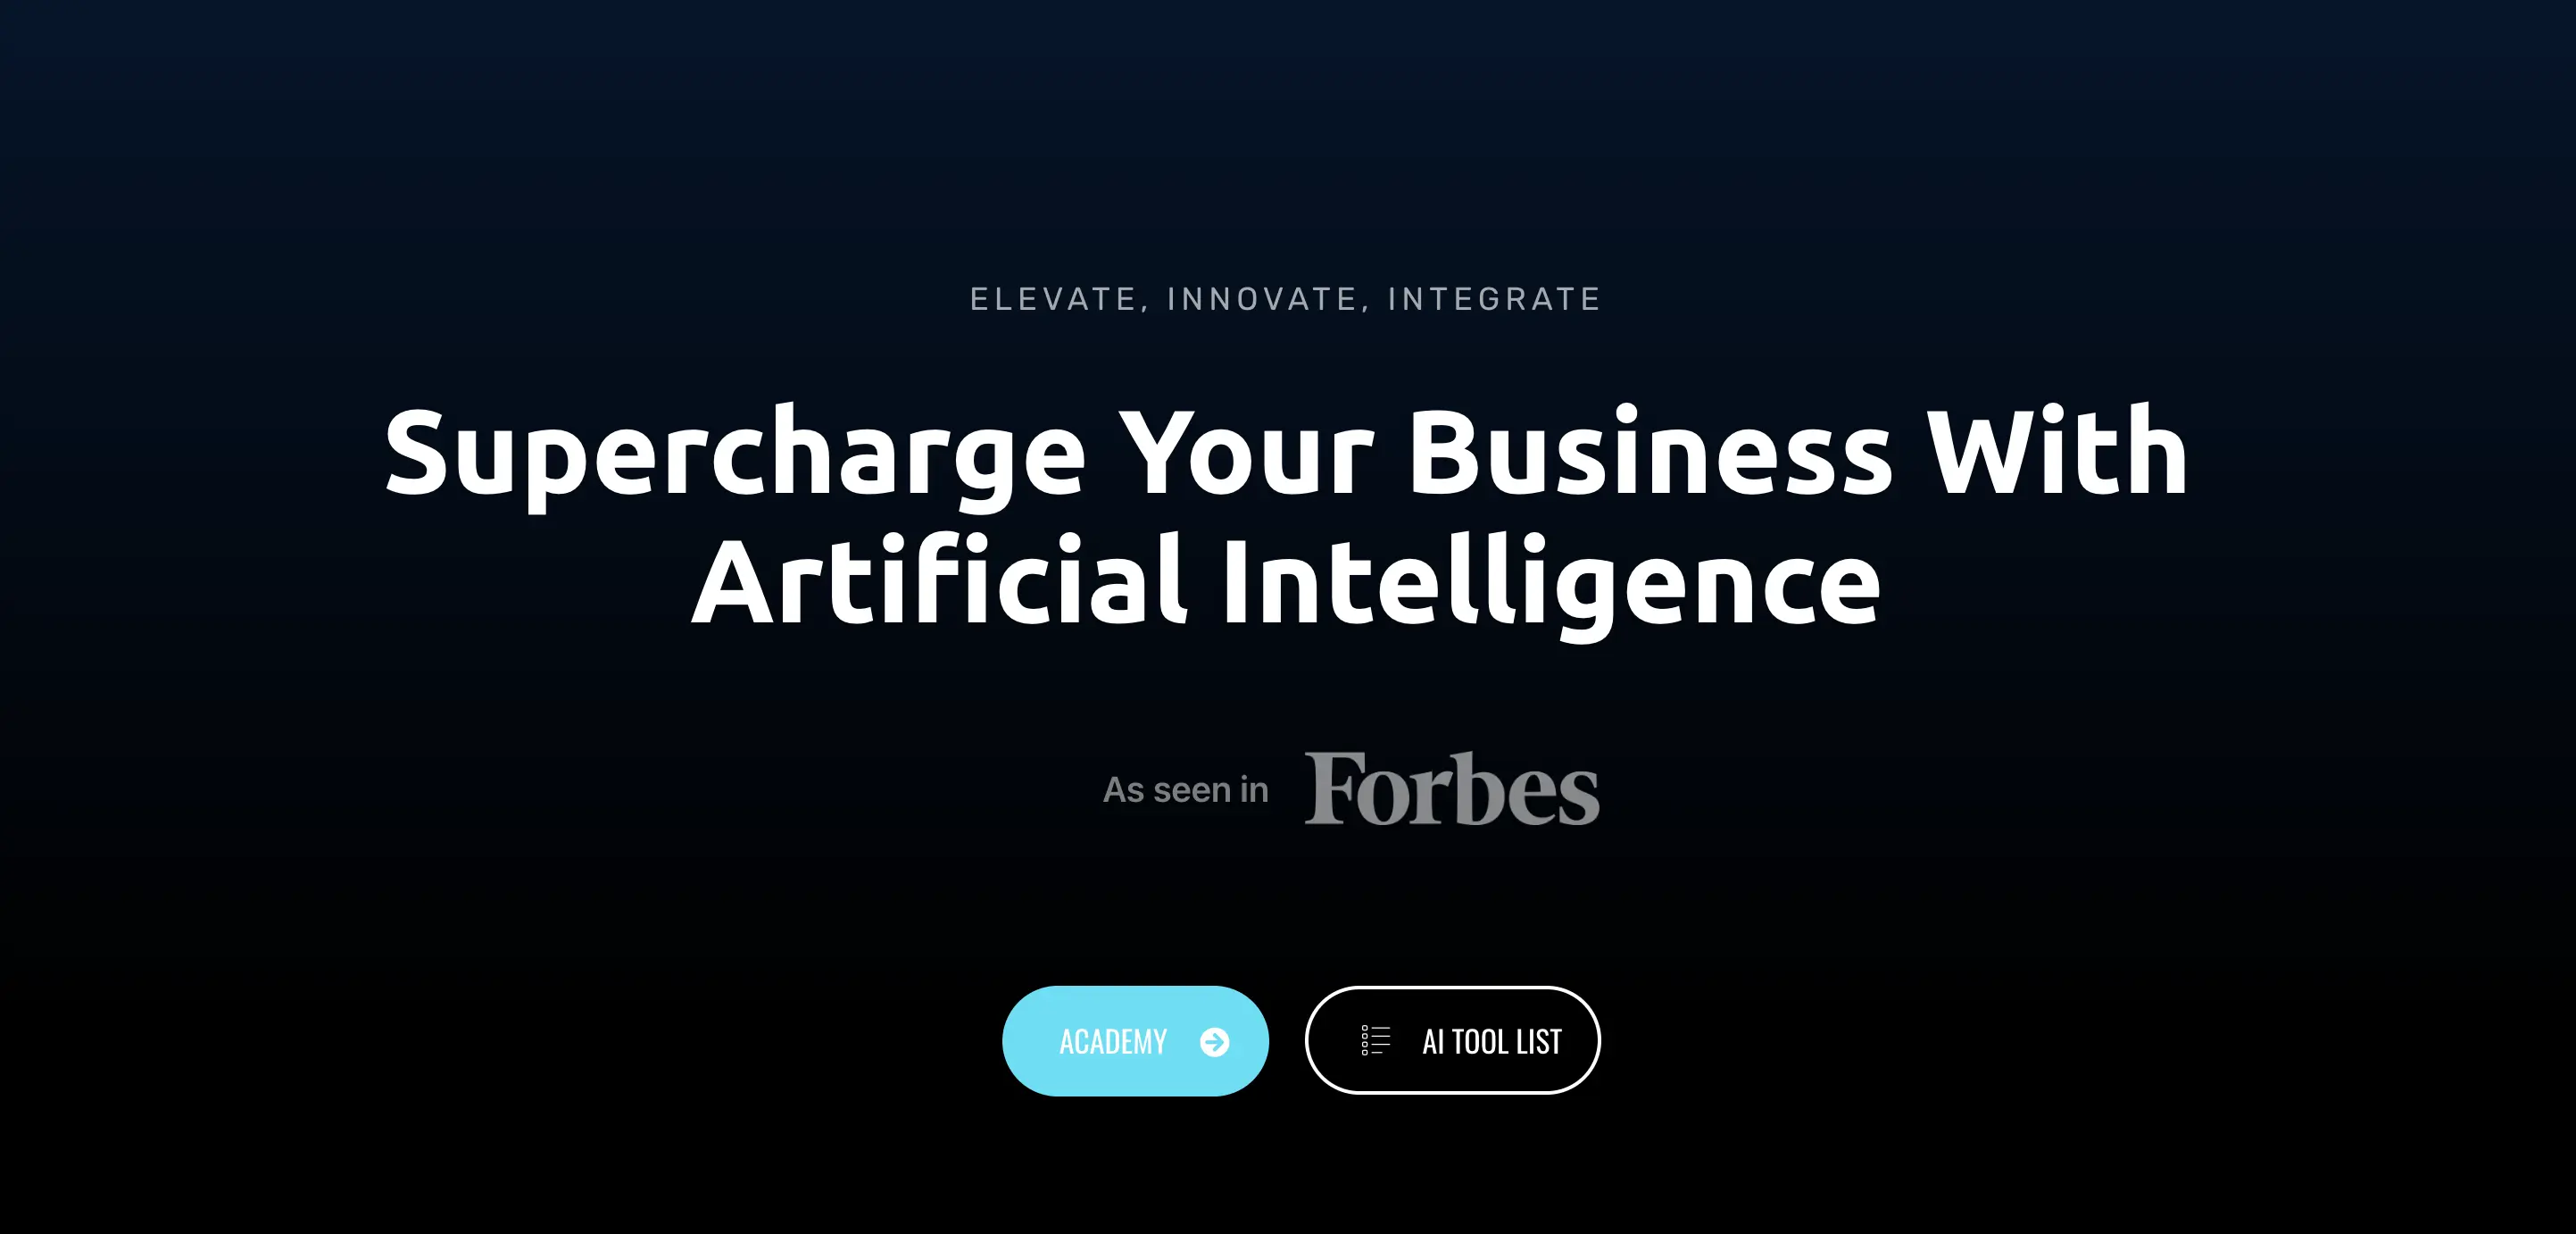 Elevating Our AI Game: The Significance of Being Listed on Insidr.ai